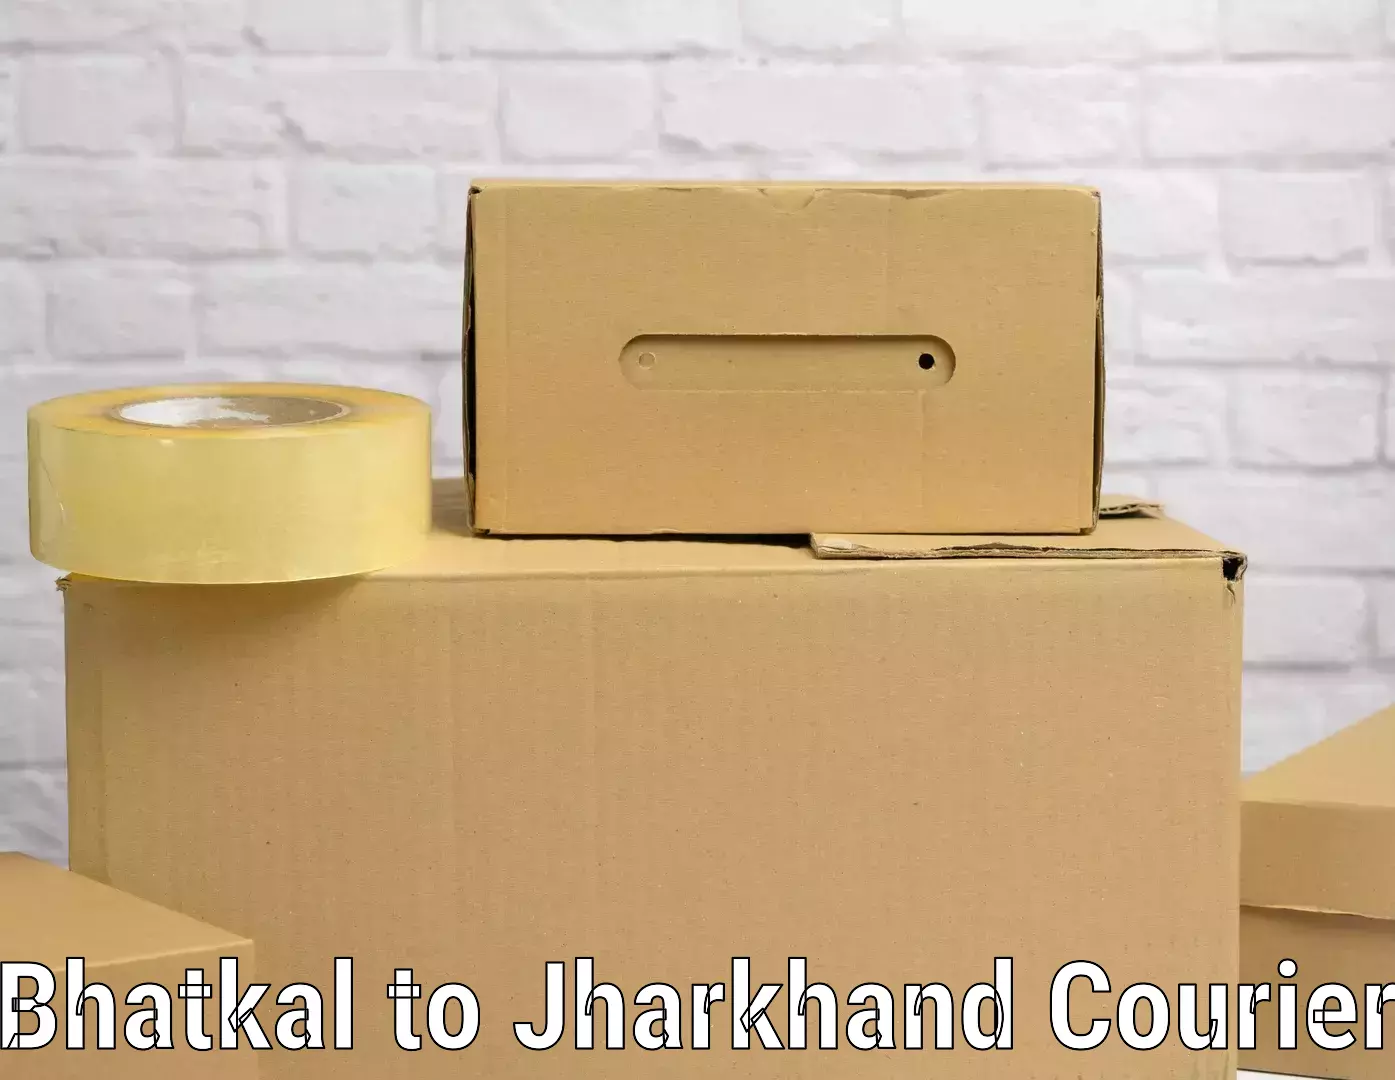 Emergency baggage service Bhatkal to Jharkhand